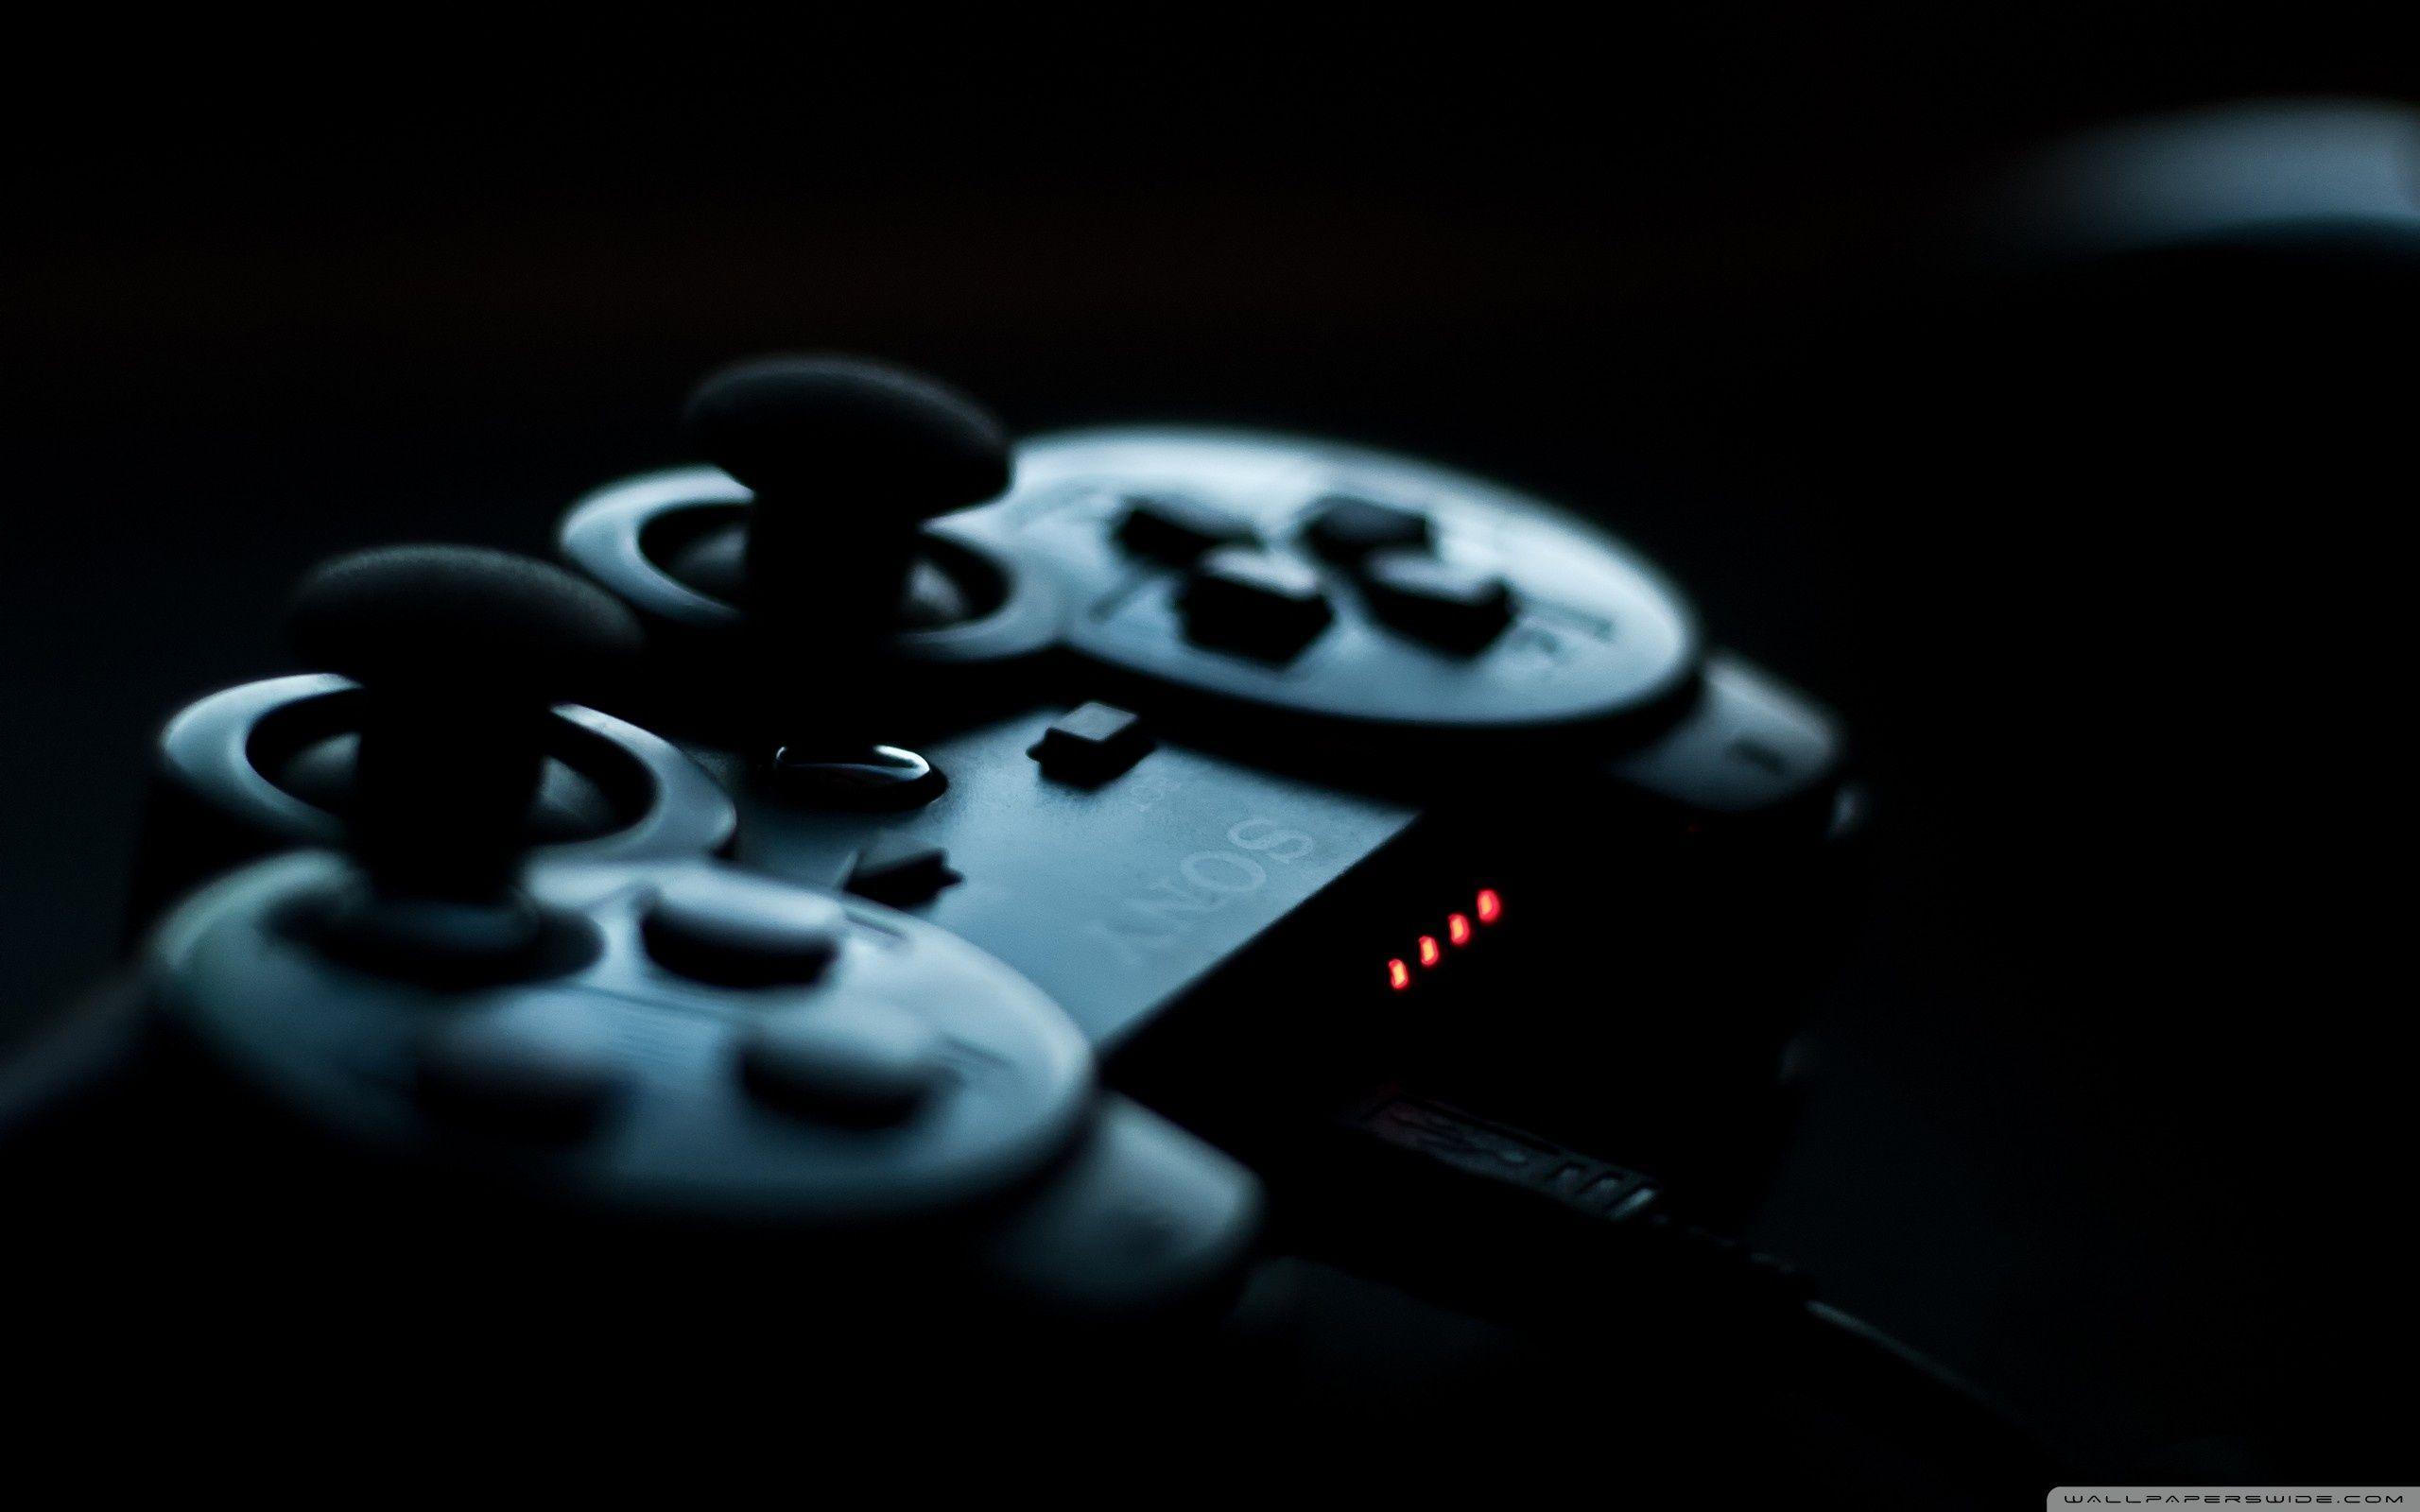 Ps3 Controller Wallpapers Top Free Ps3 Controller Backgrounds Wallpaperaccess